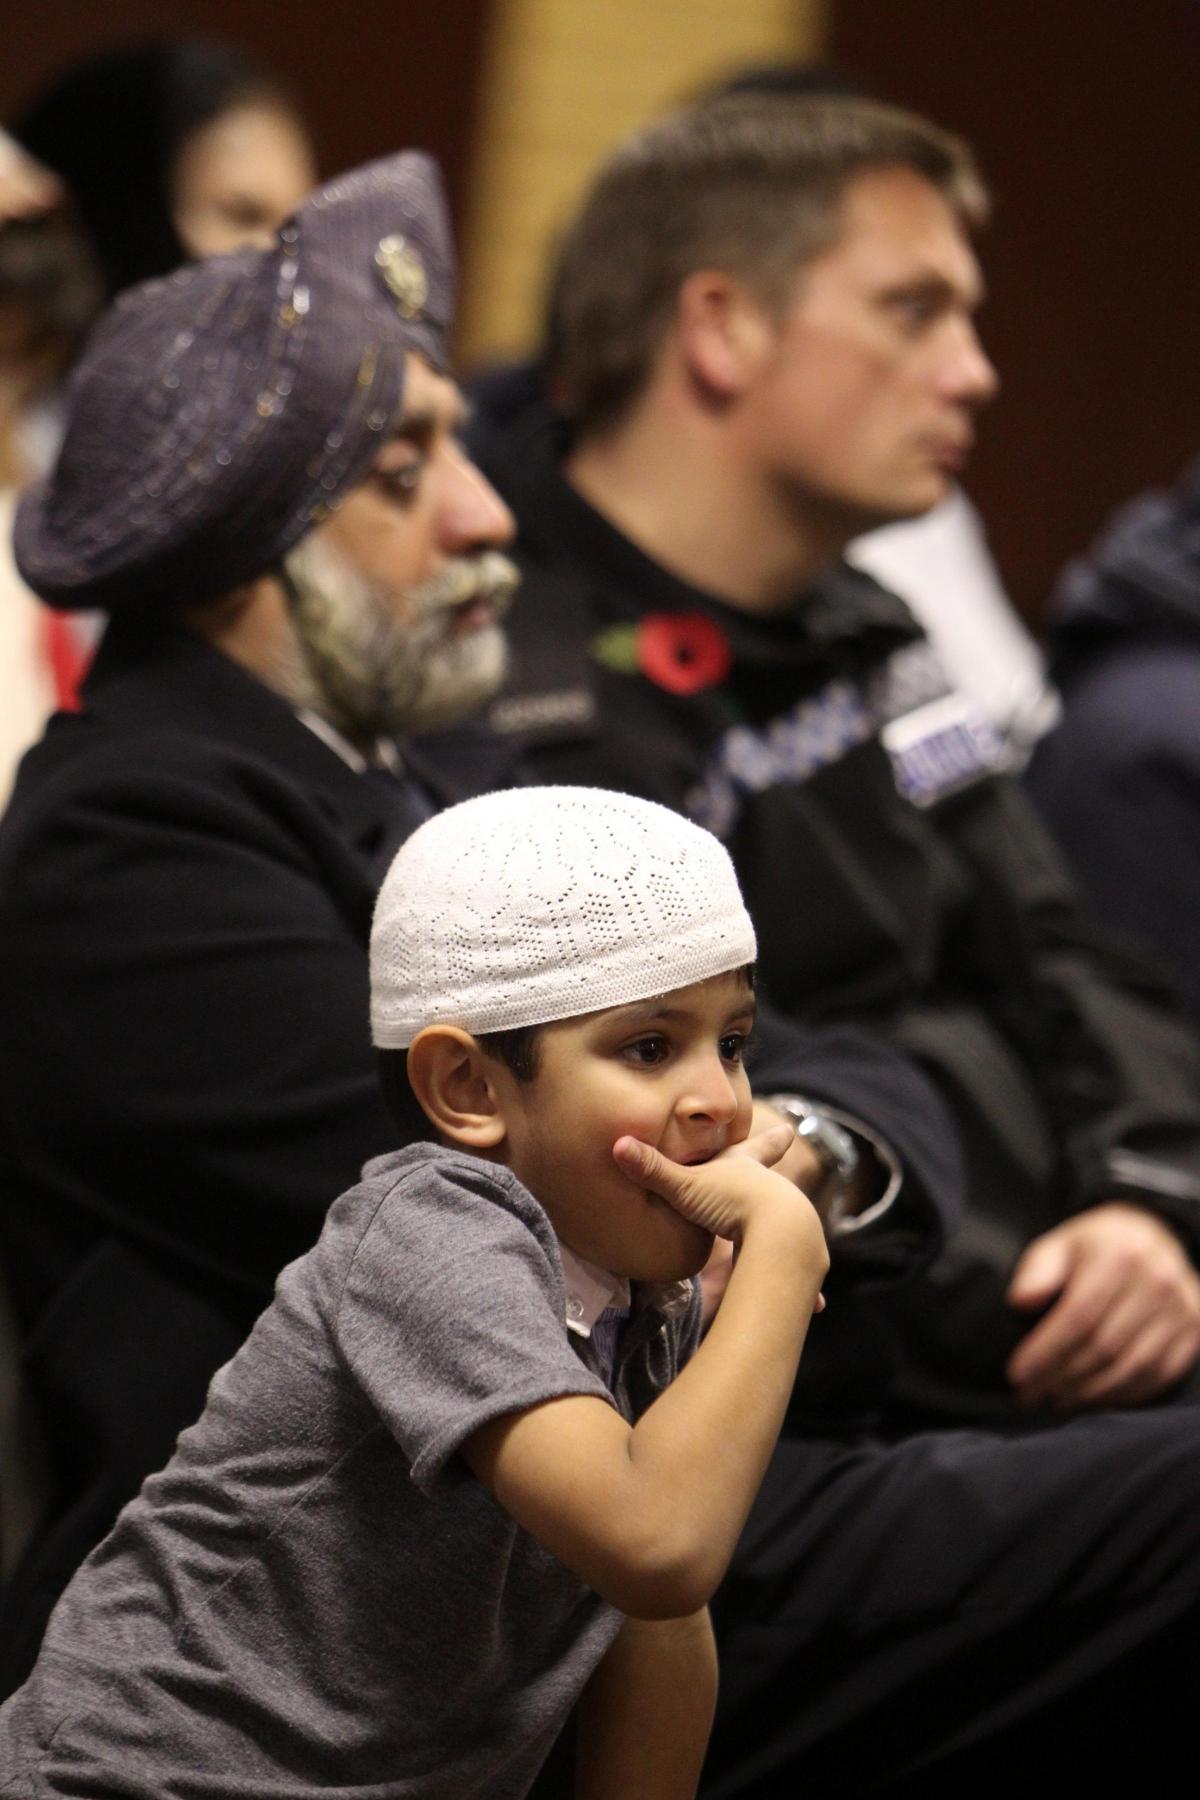 Pictures from the various remembrance services in the area - Medina Mosque.